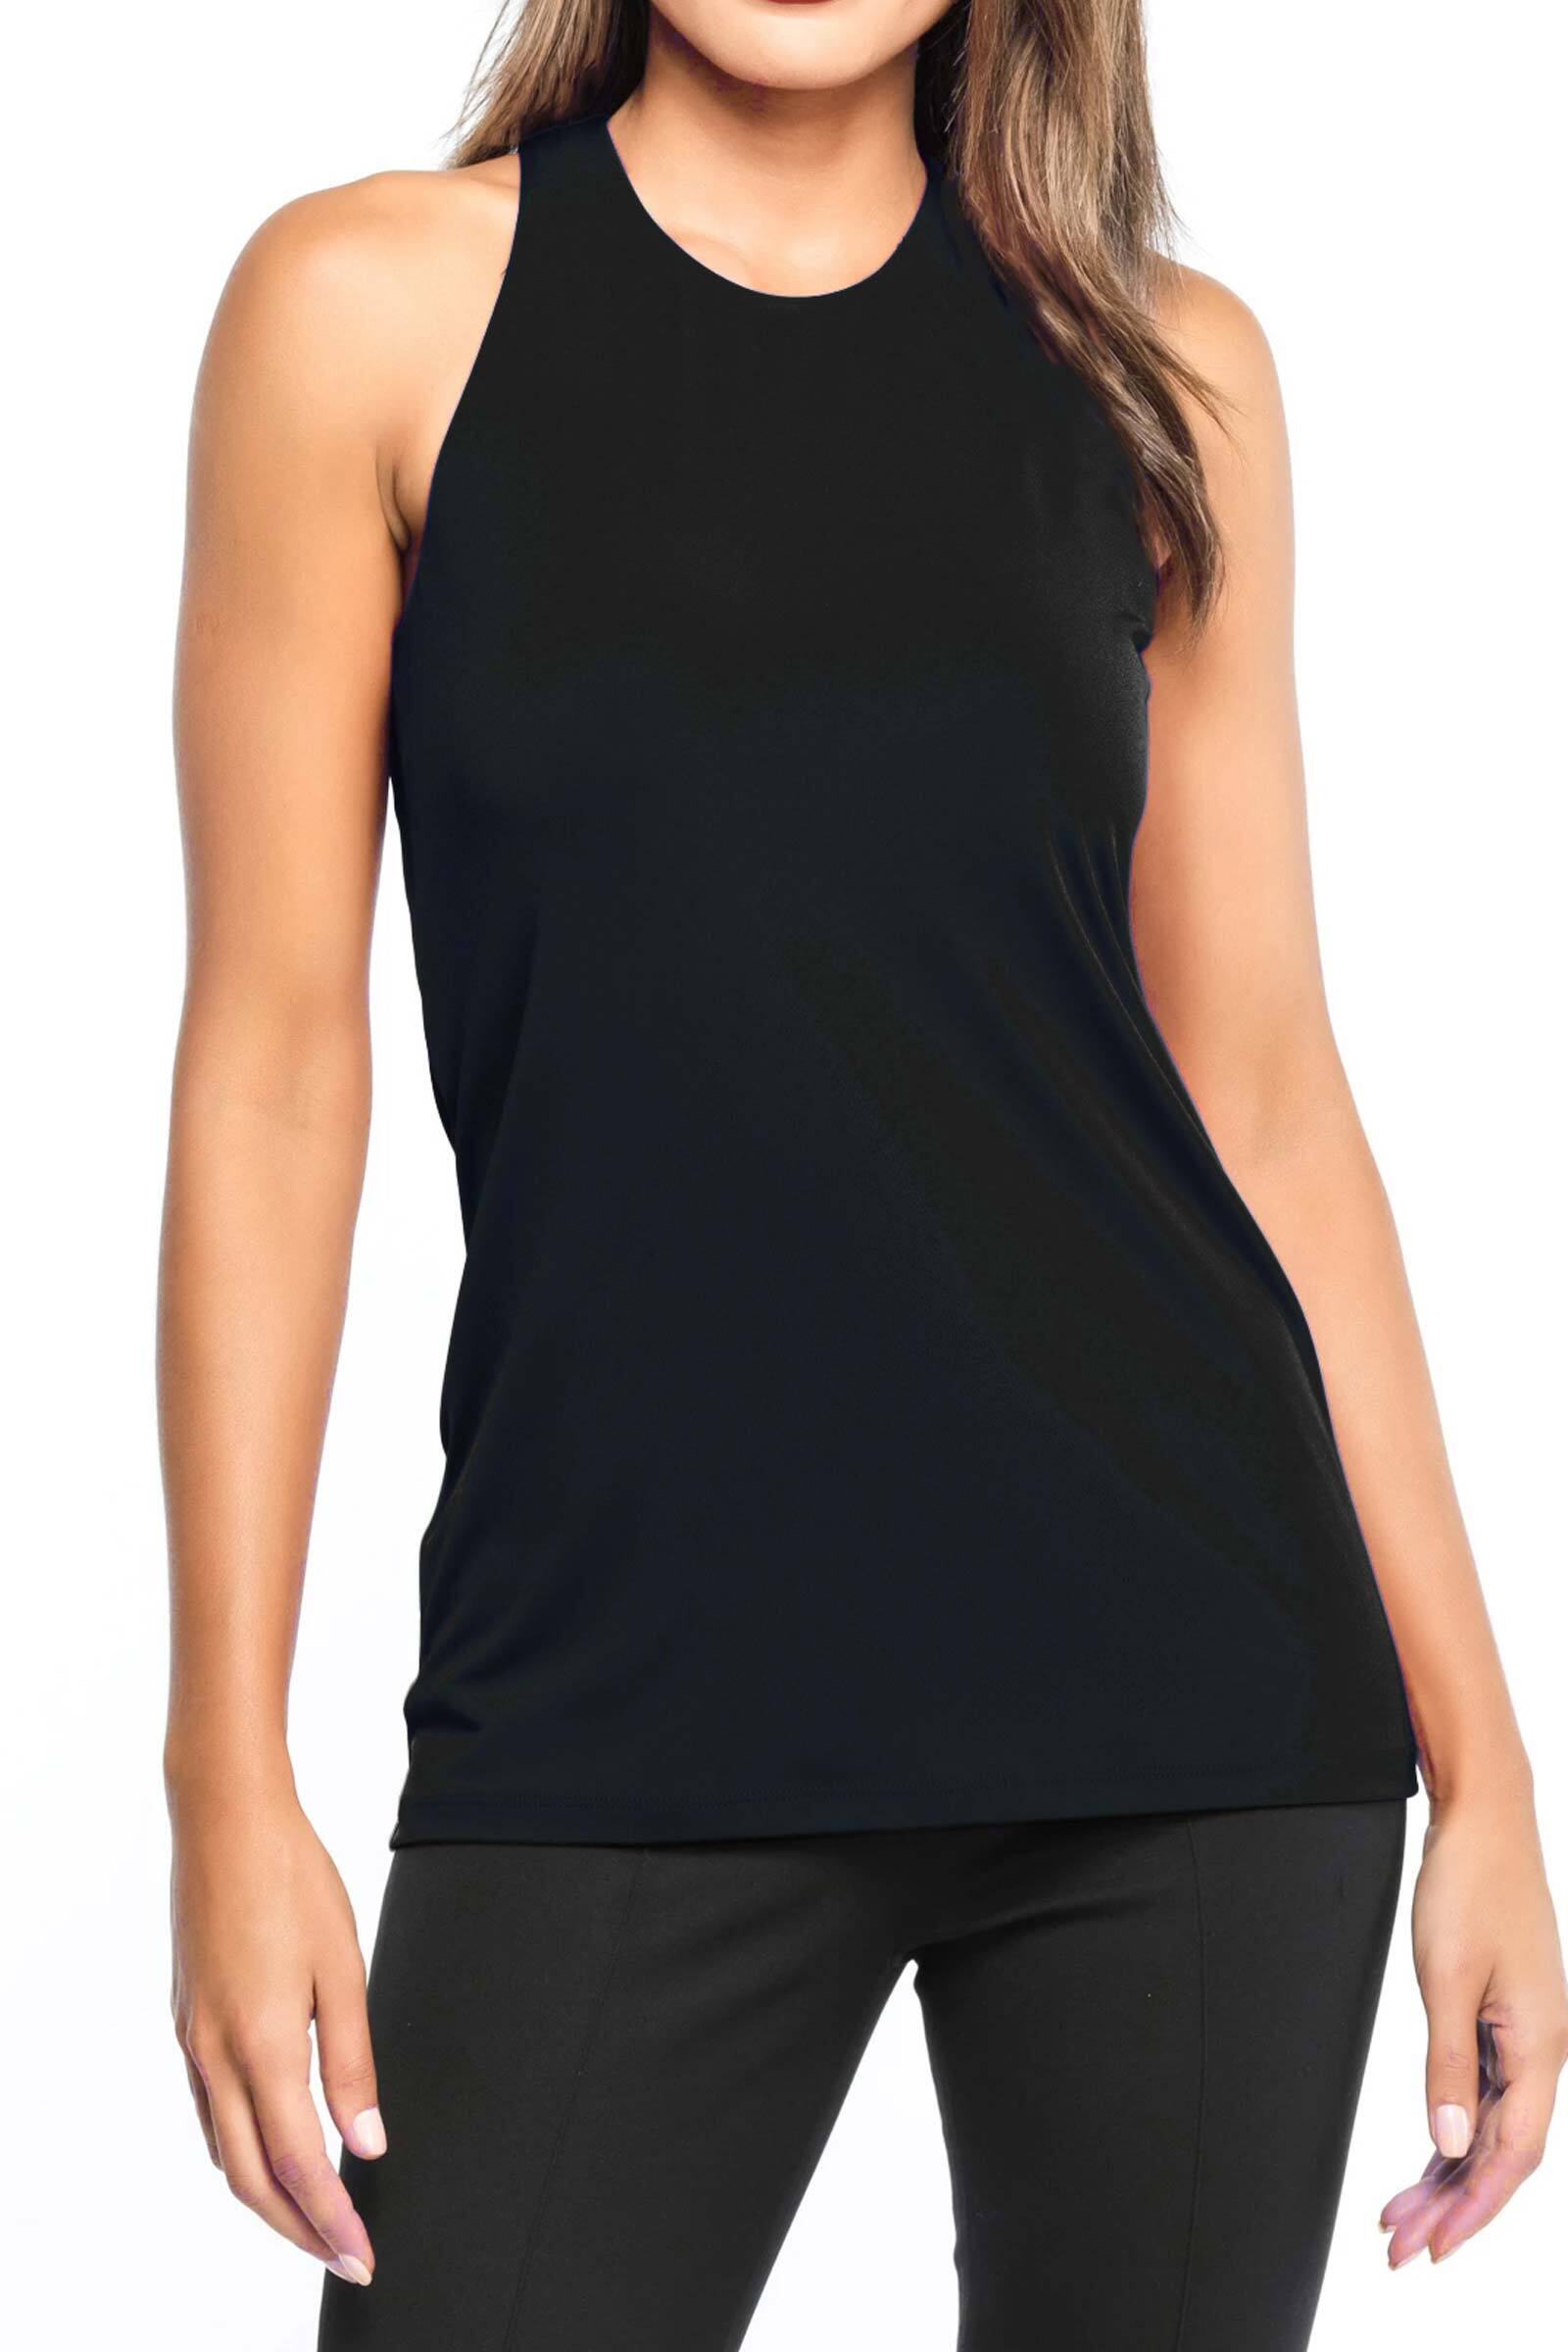 The Best Travel Top. Woman Showing the Front Profile of a Cami Wrinkle Free Travel Tank in Black